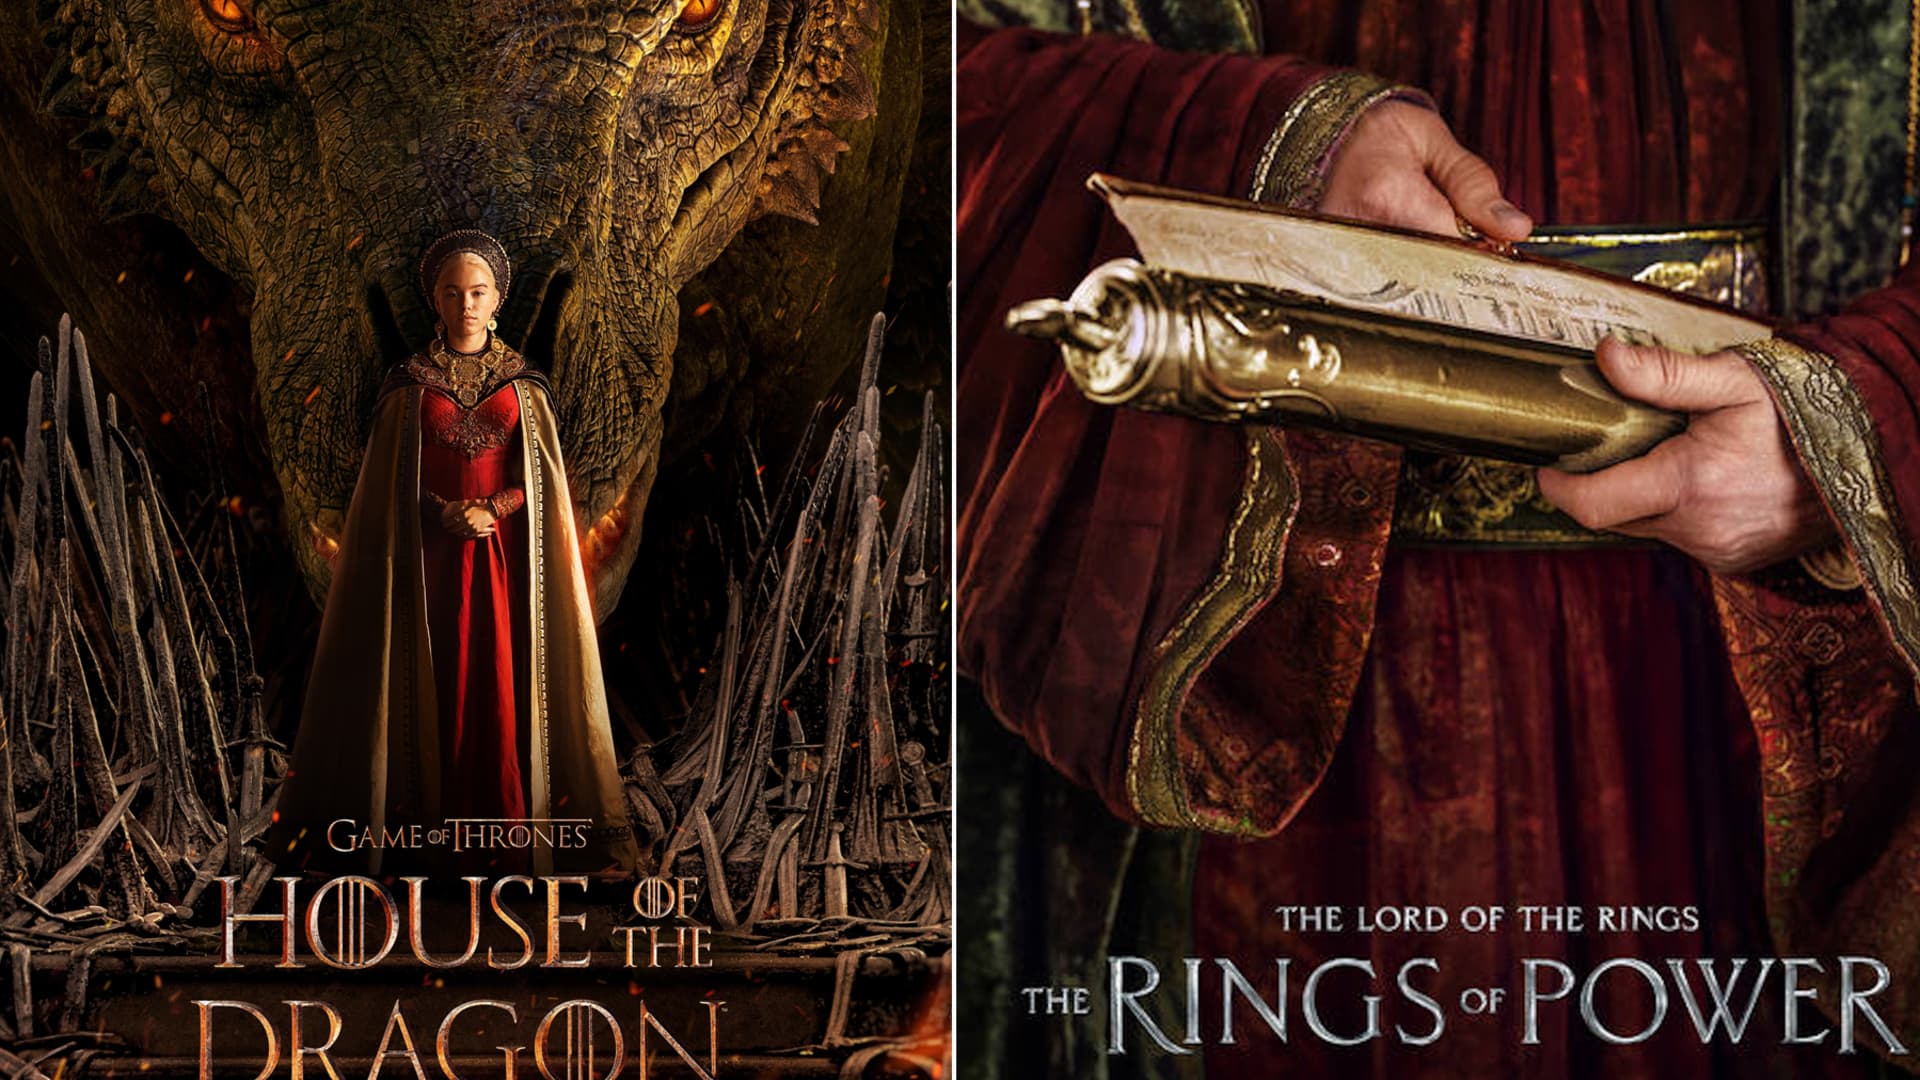 See exclusive The Lord of the Rings: The Rings of Power photos